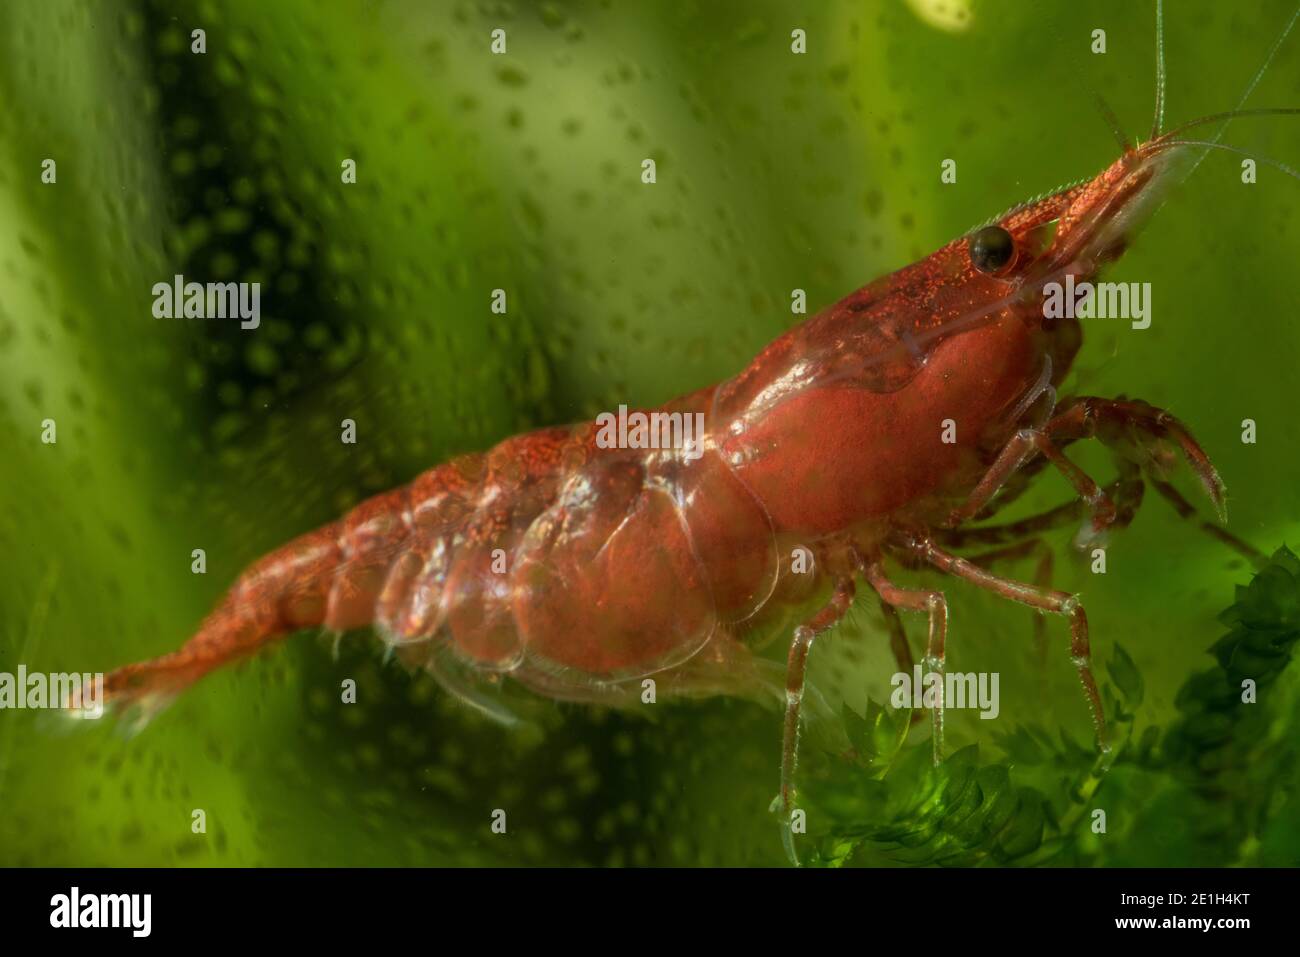 A close up of a red cherry shrimp (Neocaridina davidi), a species commonly kept in freshwater aquariums. Stock Photo